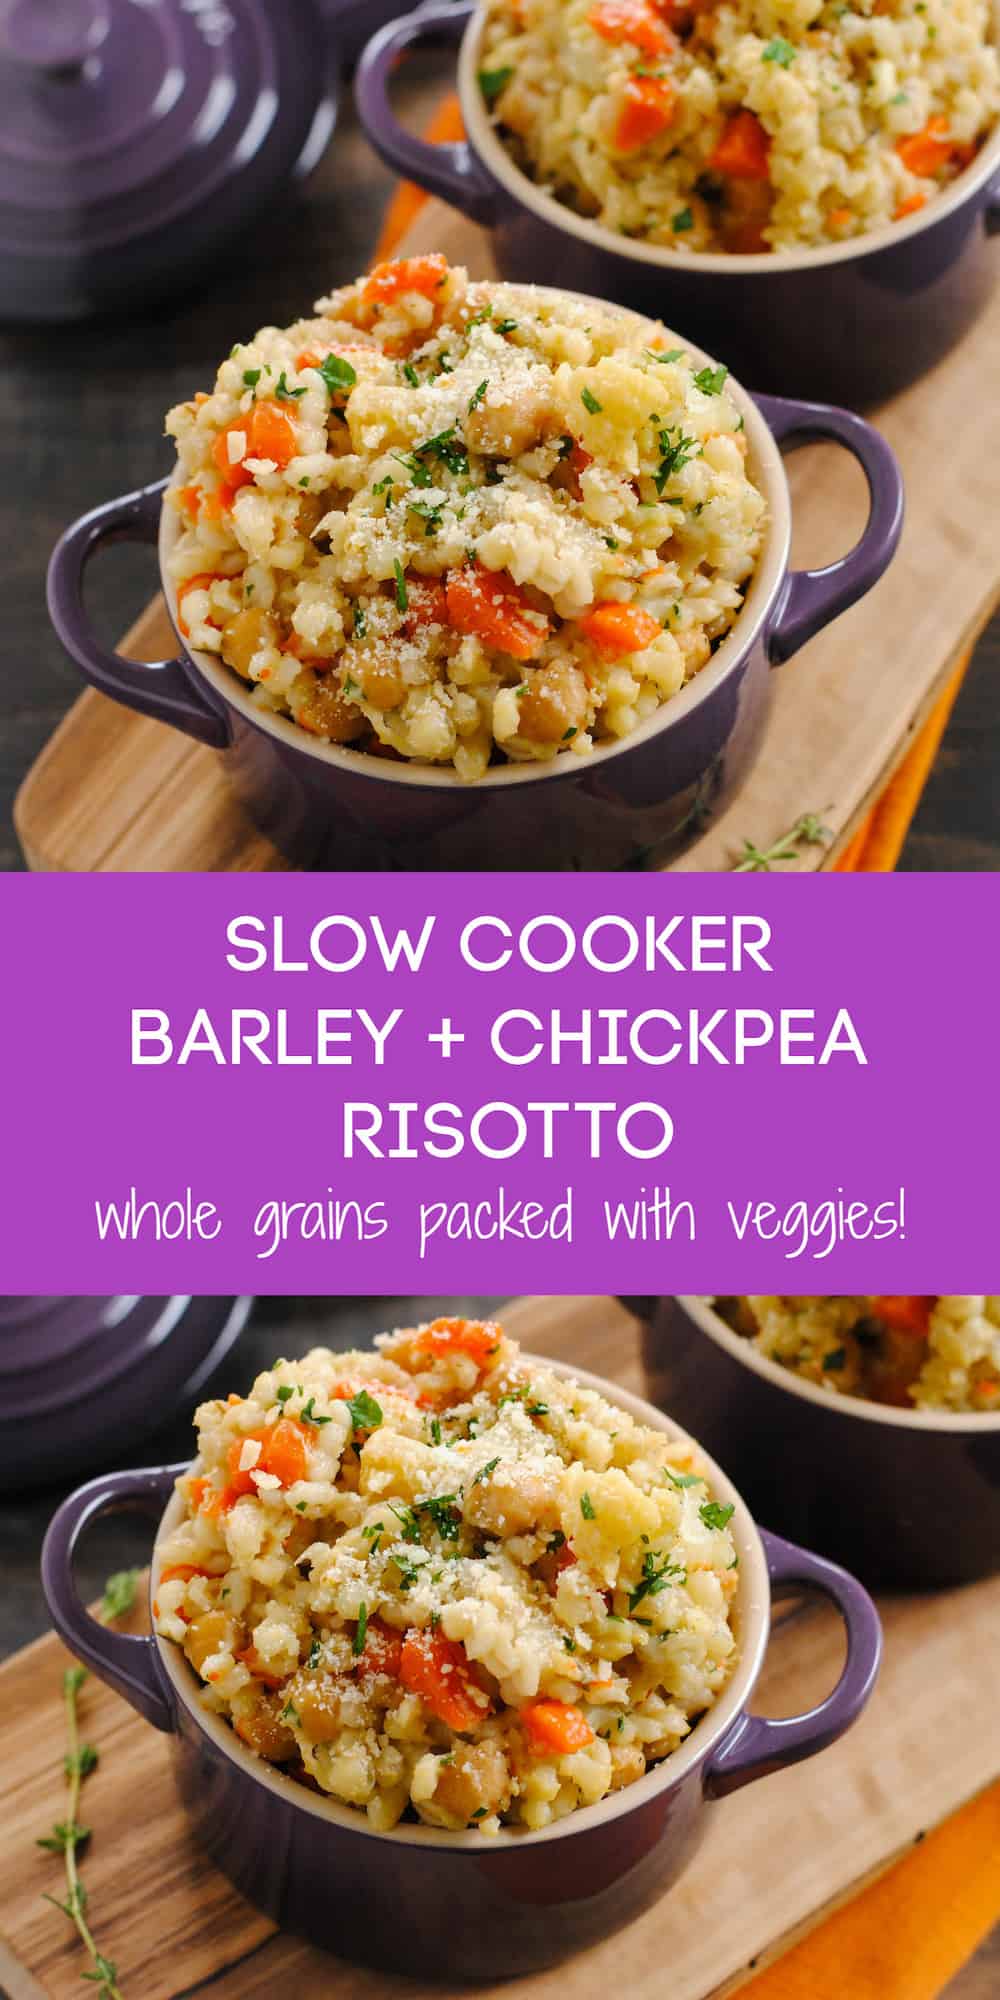 Collage of images of barley side dish in small purple pots with overlay: SLOW COOKER BARLEY + CHICKPEA RISOTTO whole grains packed with veggies.